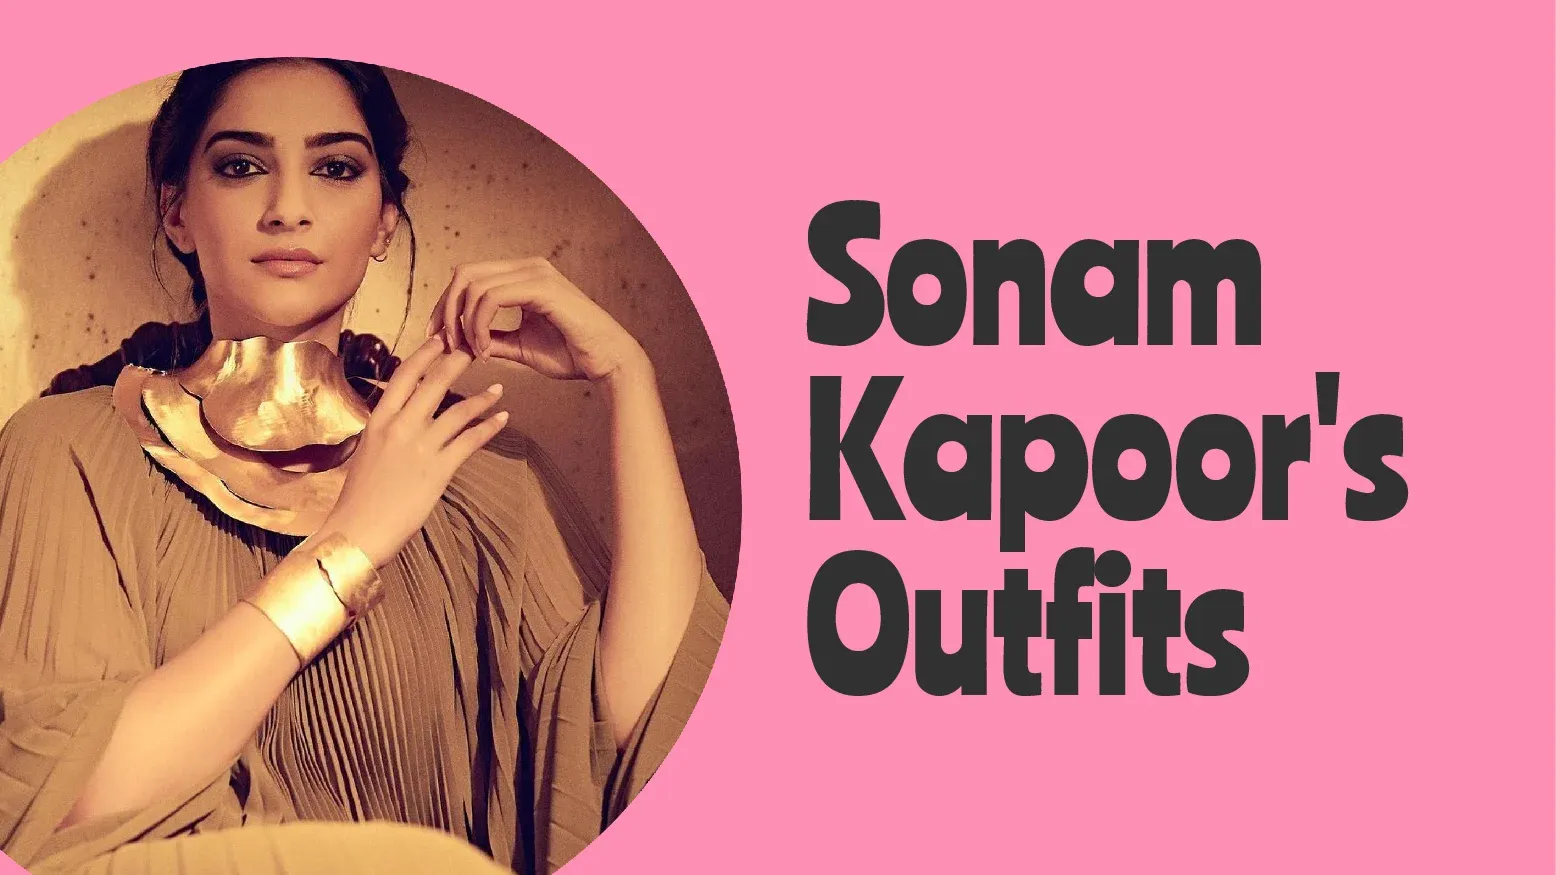 Outfits to Steal From Sonam Kapoor's Wardrobe